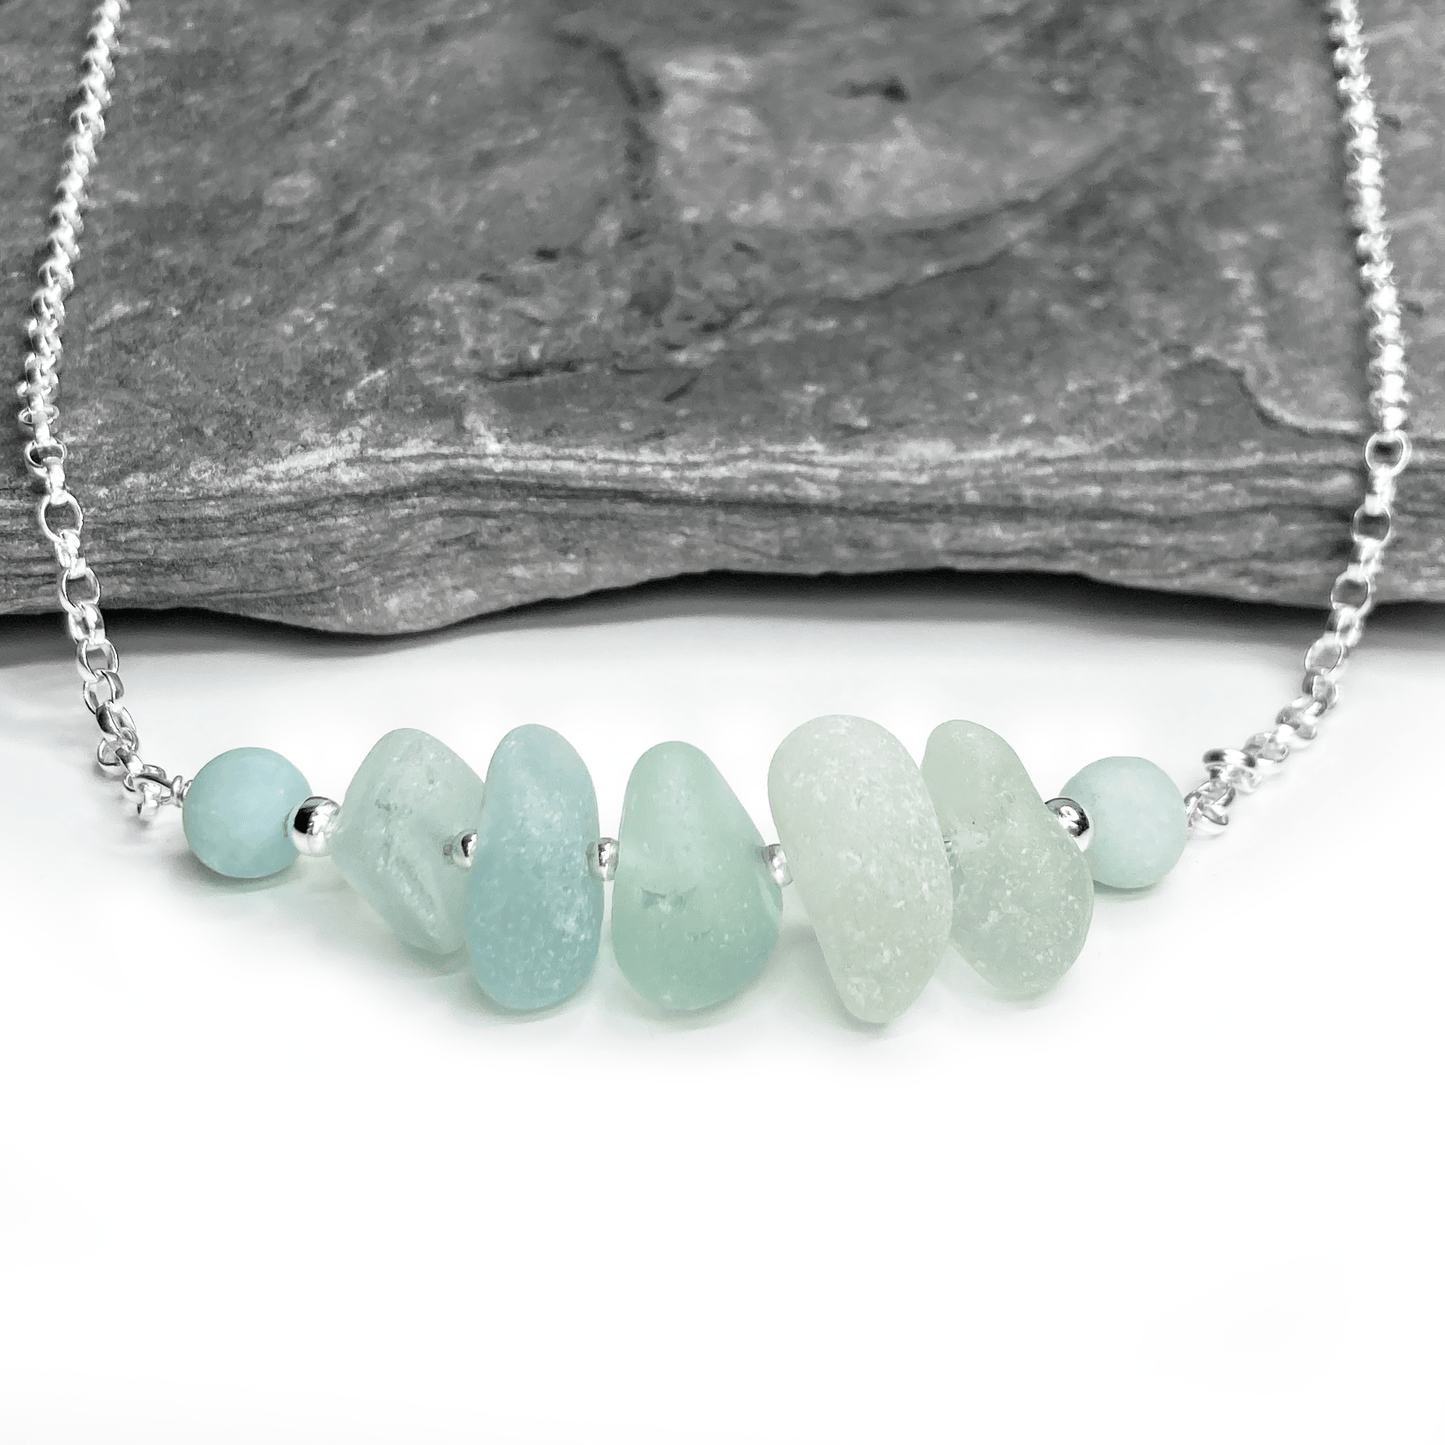 Aqua Green Sea Glass Necklace with Amazonite Crystal Beads - Sterling Silver Scottish Jewellery - East Neuk Beach Crafts